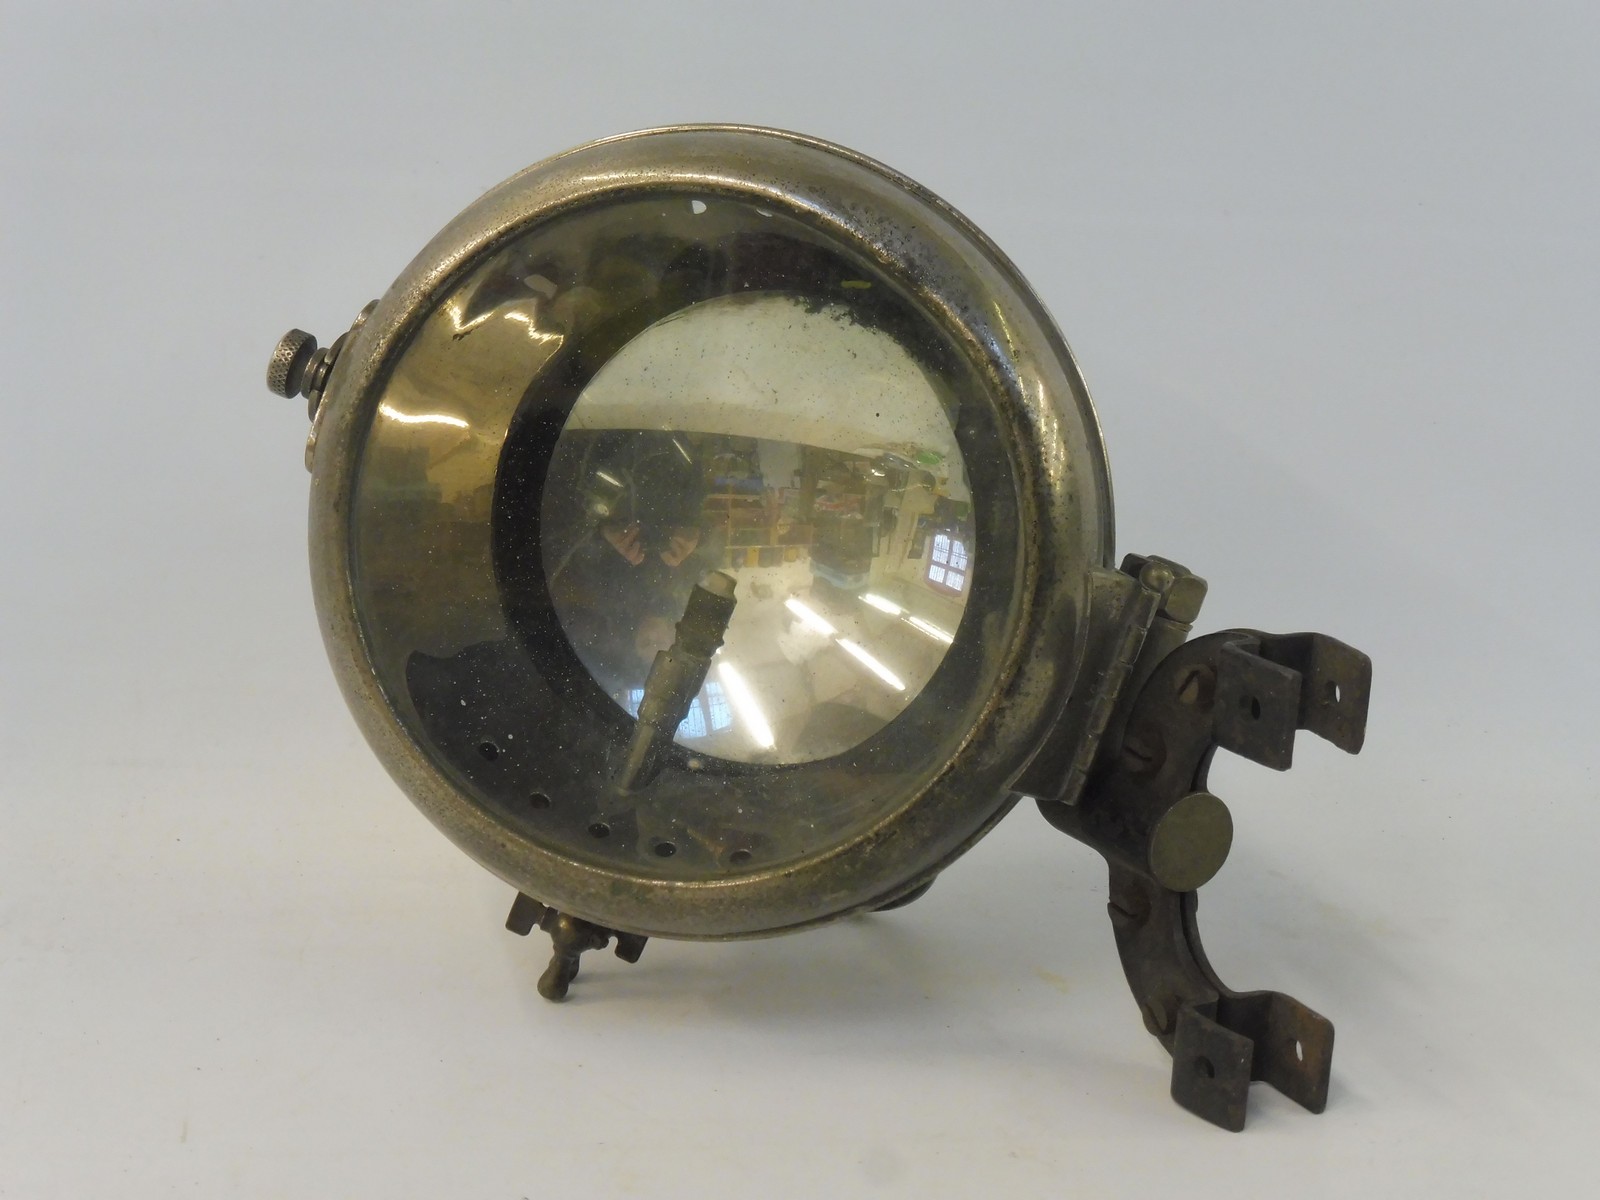 An early French nickel plated spot lamp marked Phares Auteroche Reflex.